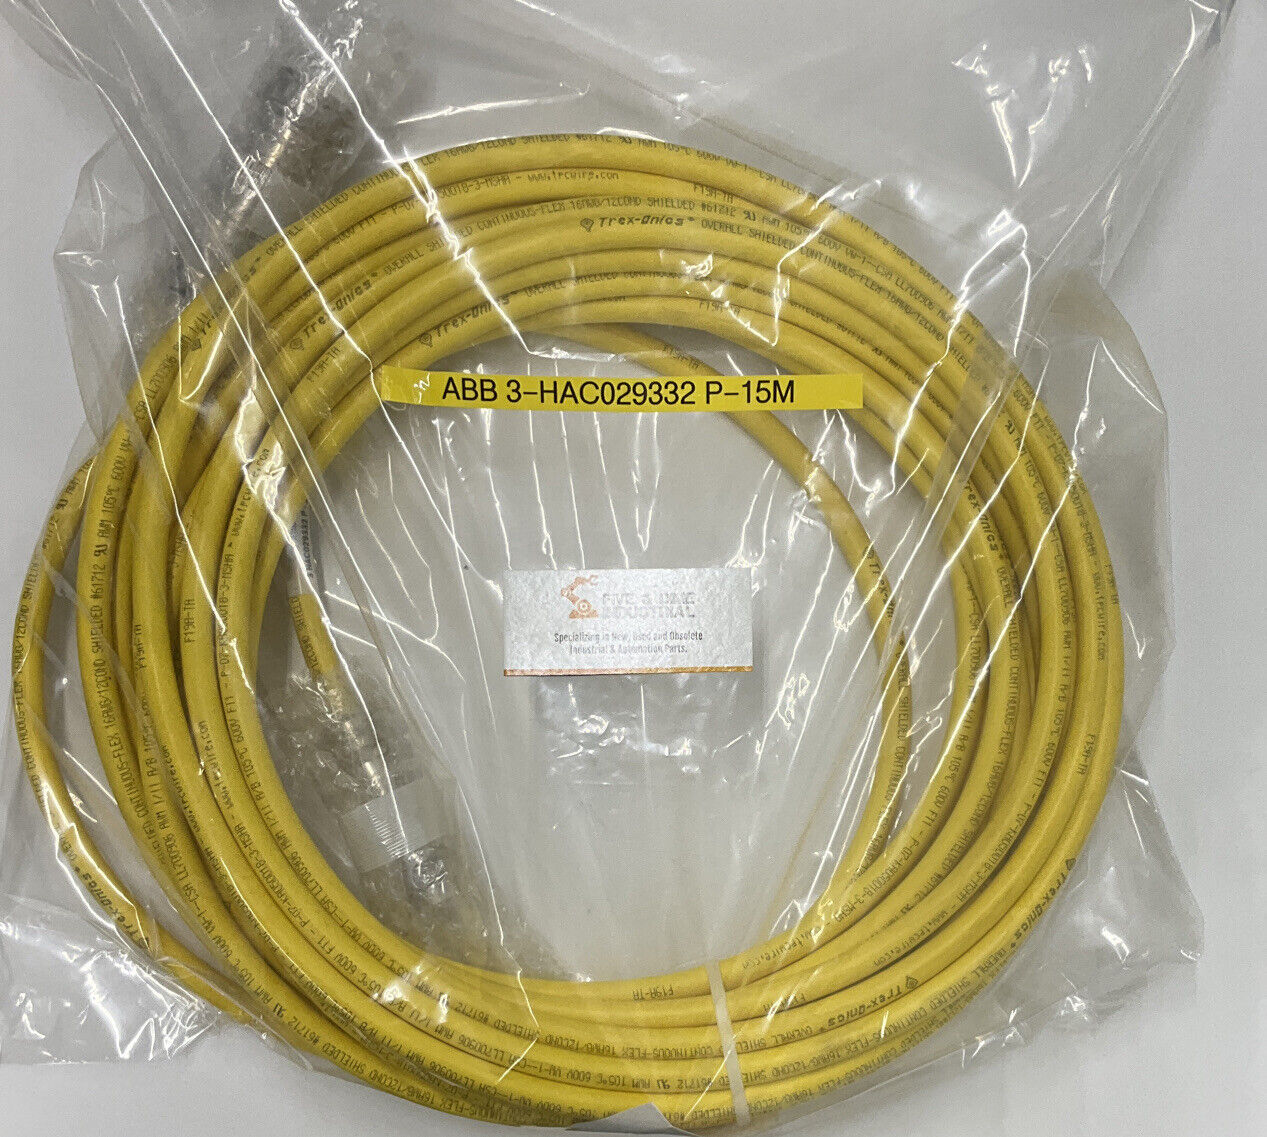 ABB 3 HAC029332 P-15M Control Power Cable 15 Meters (CBL140)